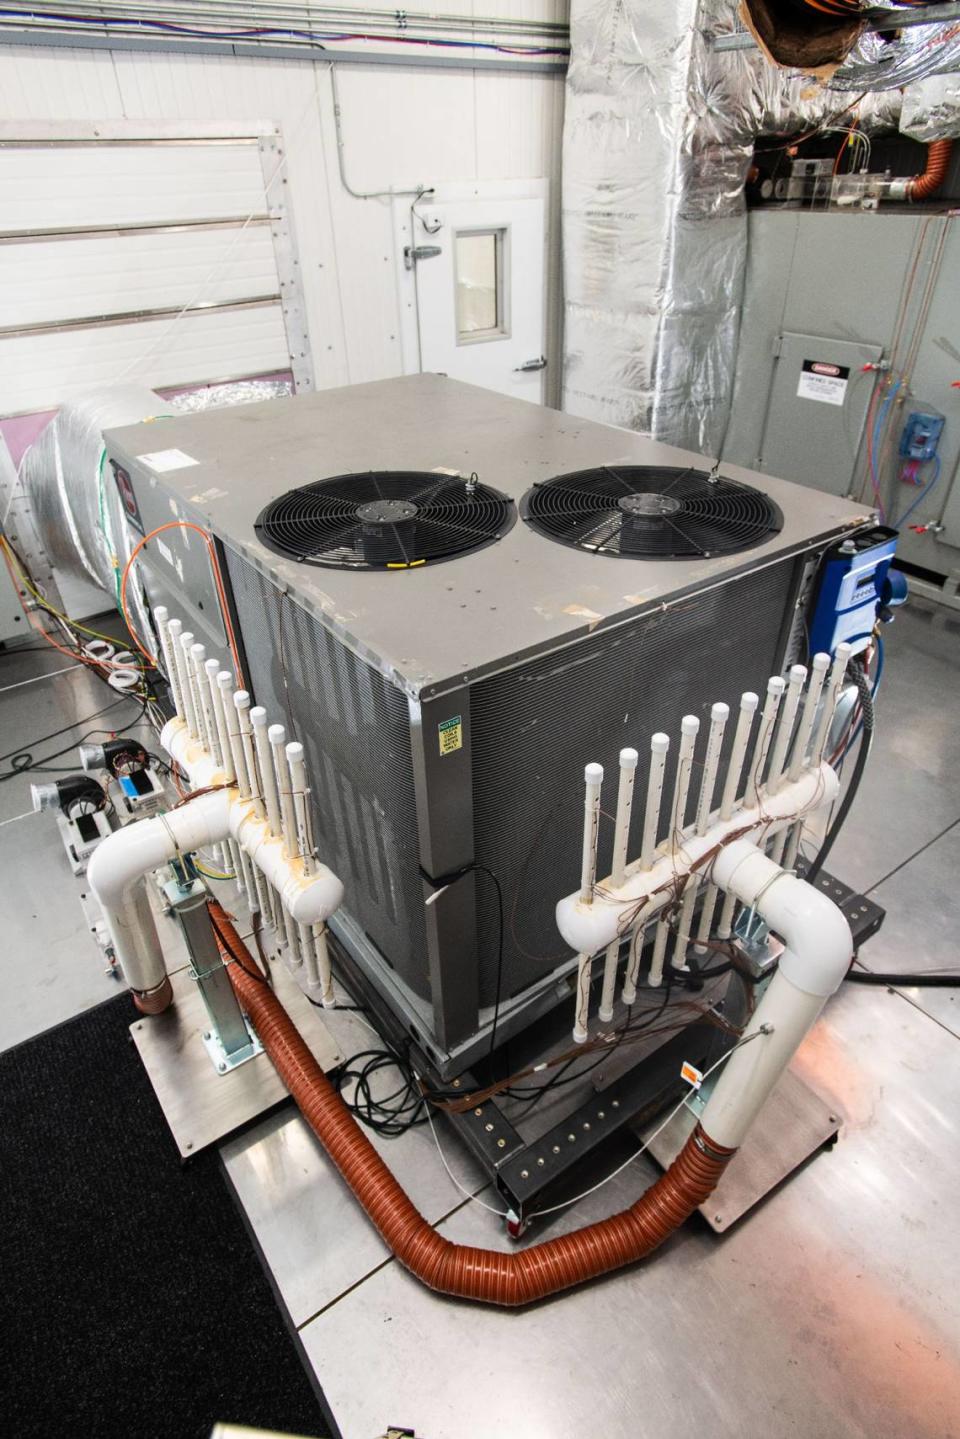 PNNL’s Environmental Chambers enable testing of building technologies, such as air-conditioners and heat pumps, by controlling temperature and humidity in dedicated indoor and outdoor test rooms.